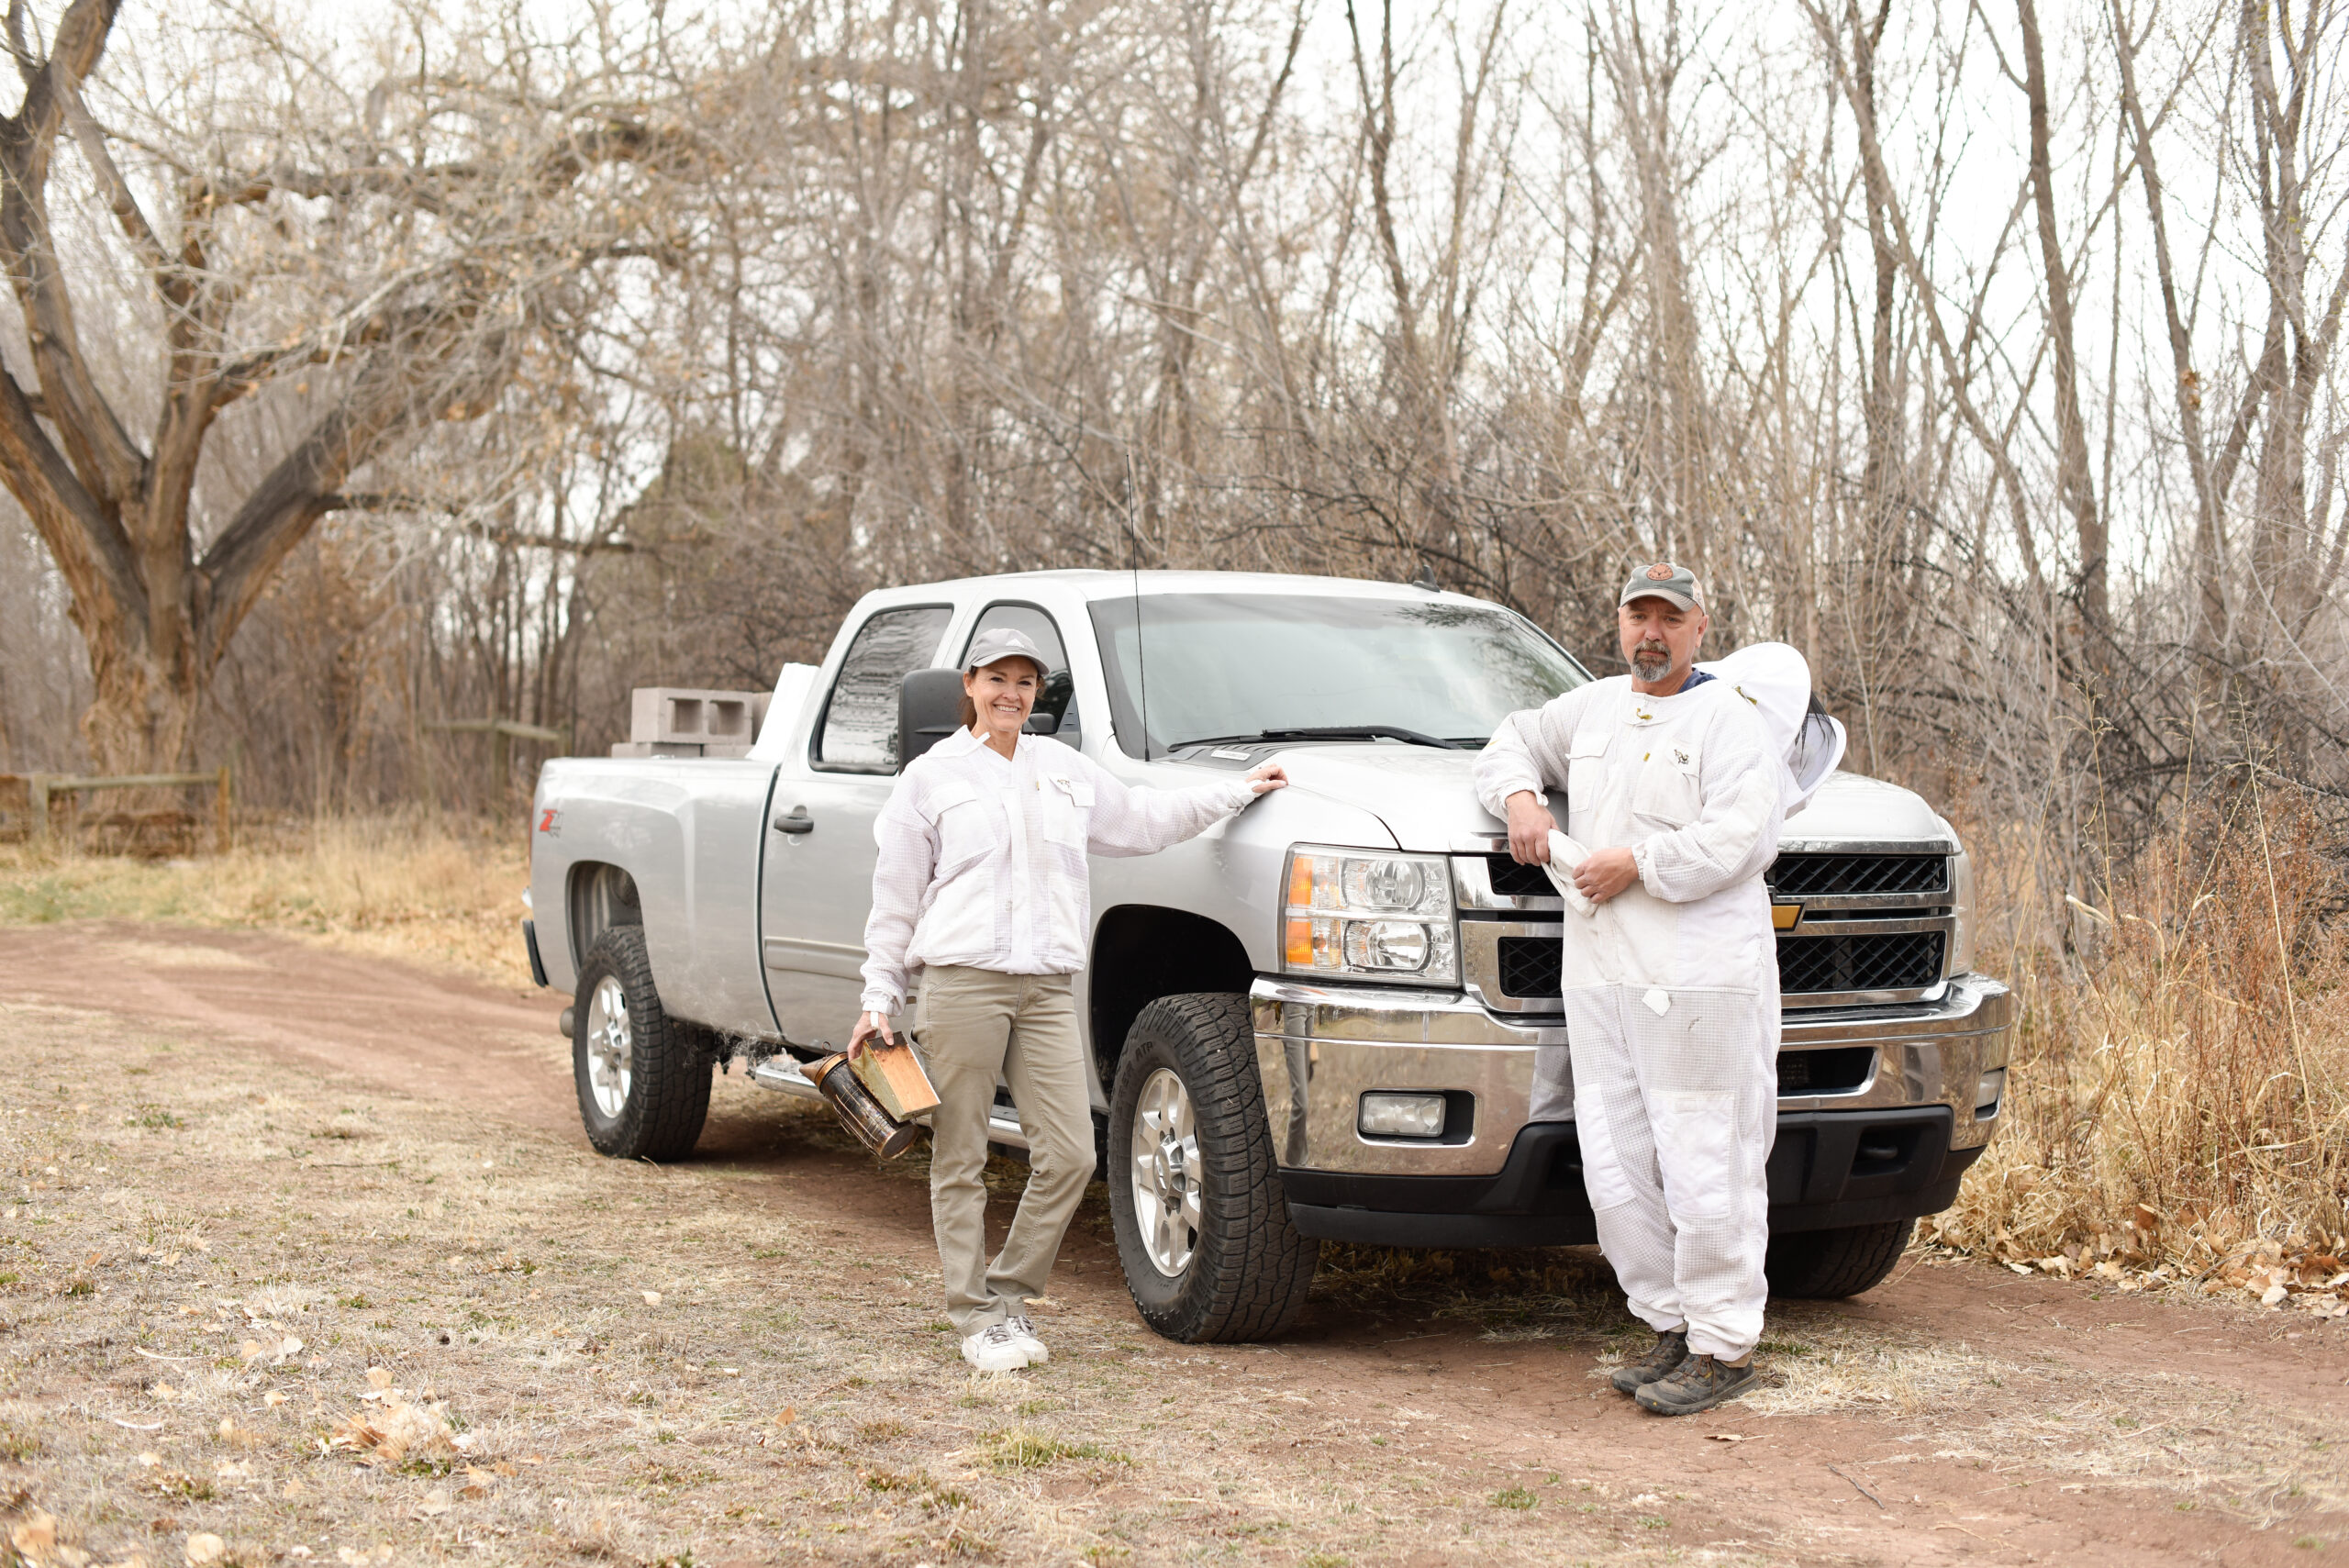 Two men standing next to a truck in the woods.